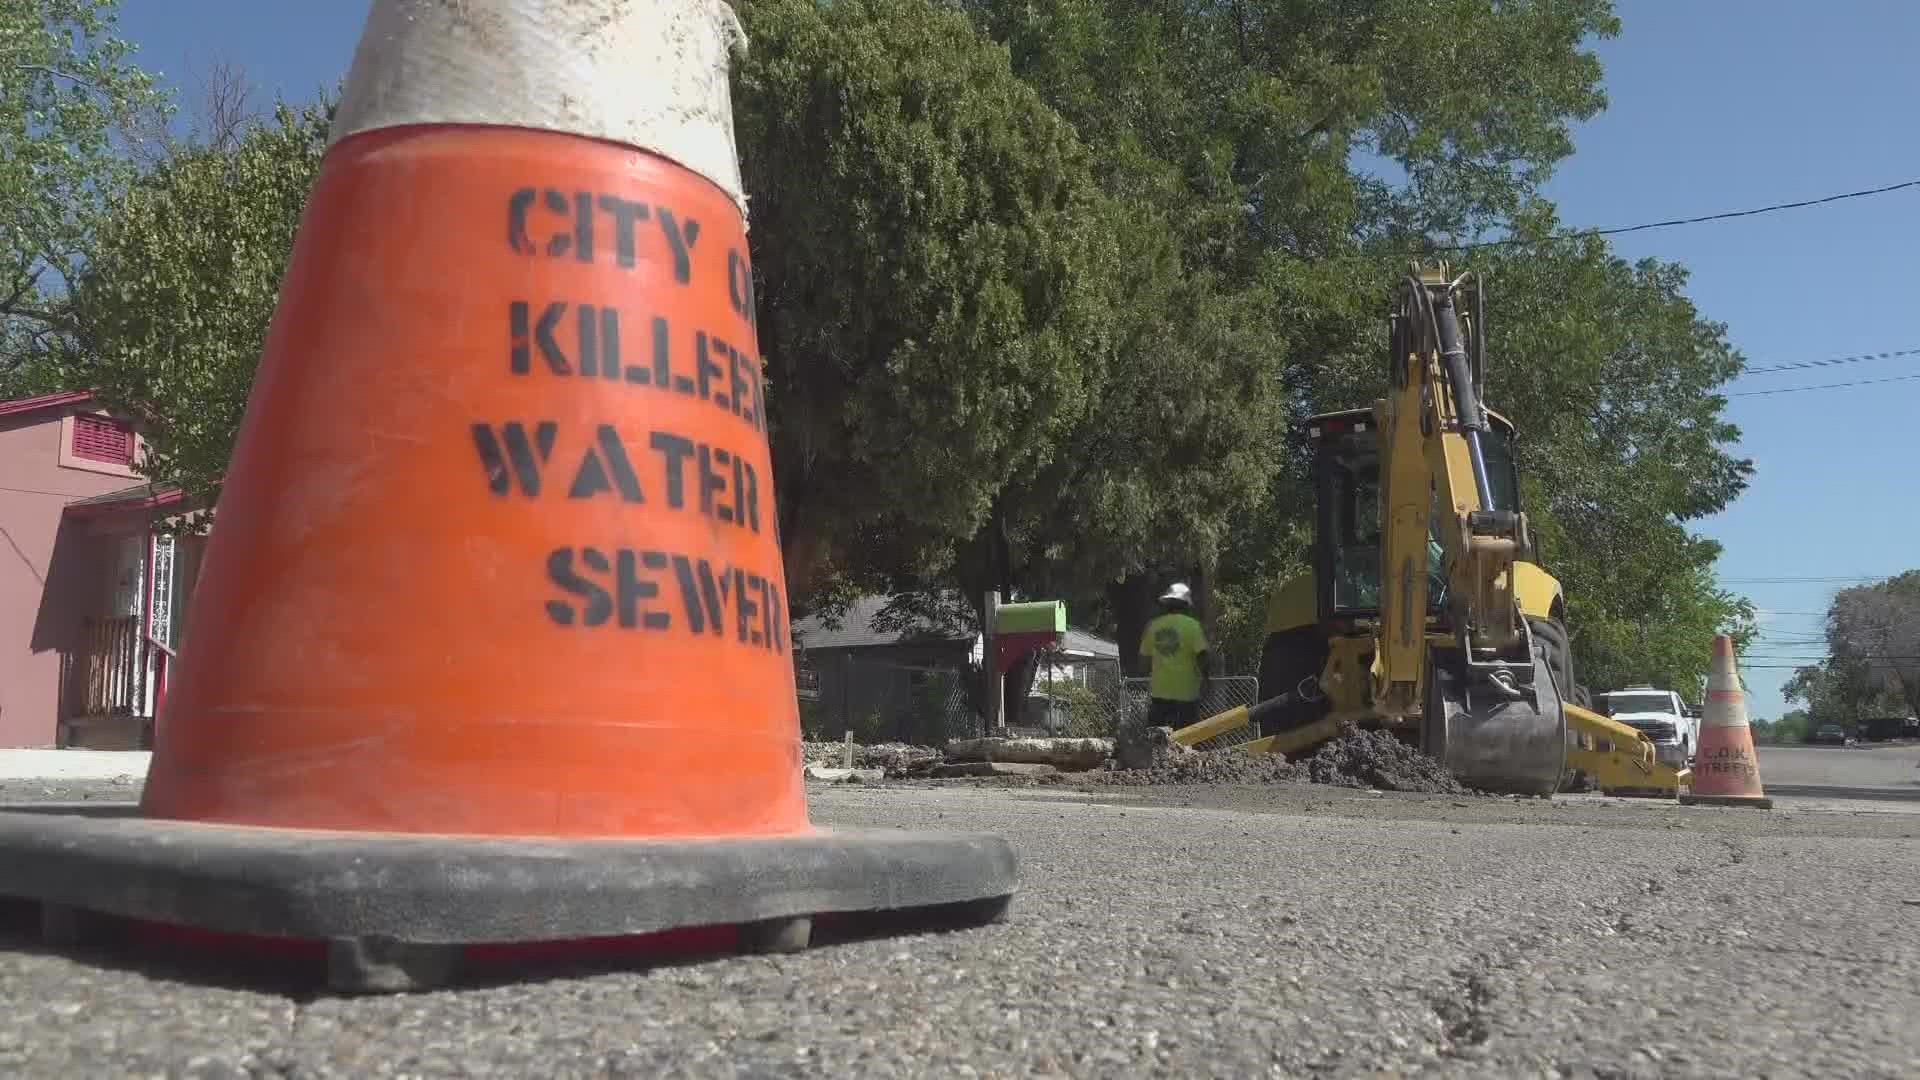 Killeen crews saw 111 water main breaks in the last fiscal year, but they've already hit it this time around with two months to go.